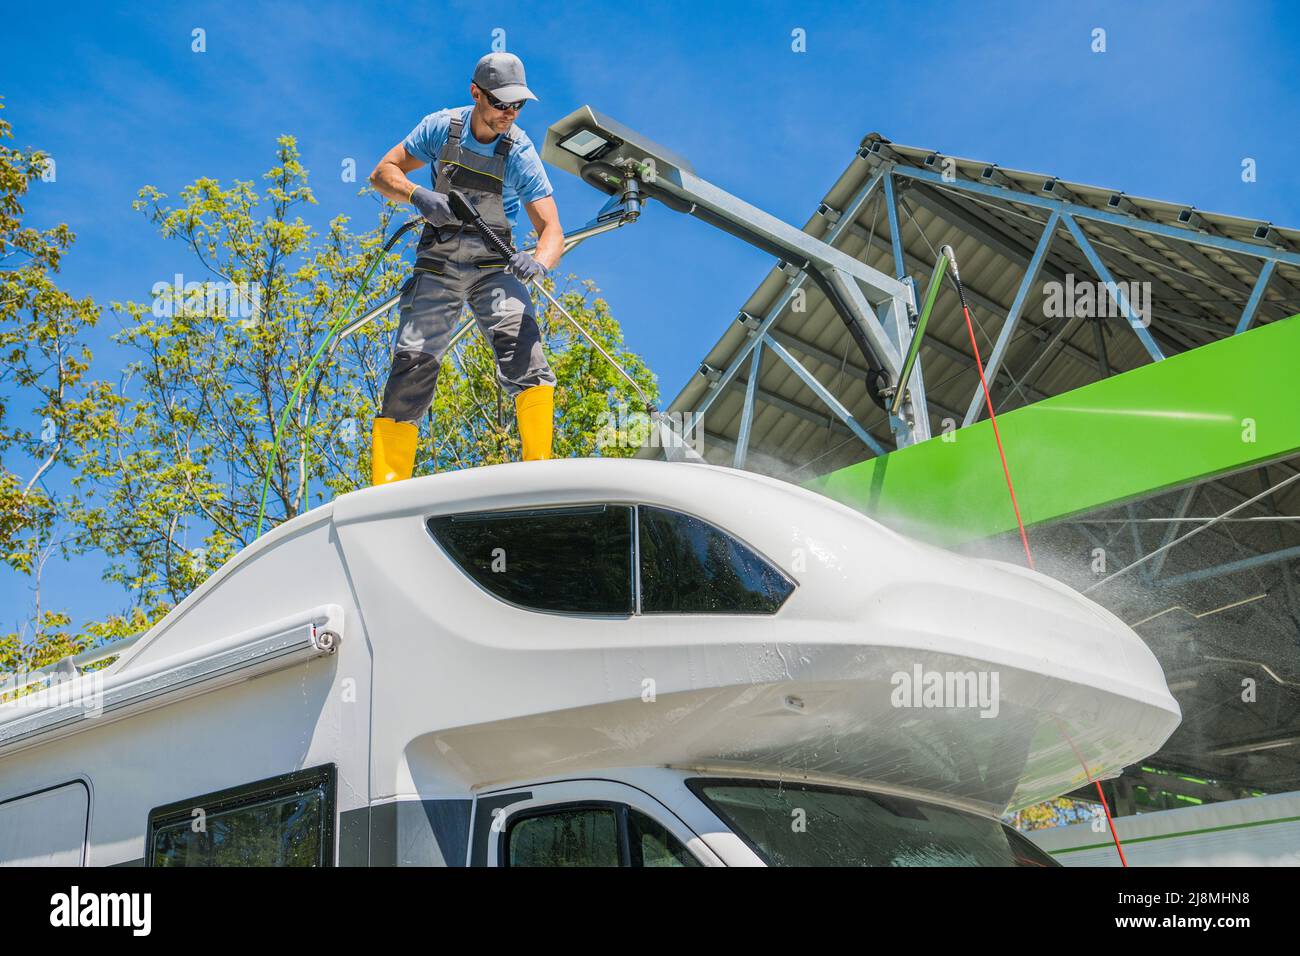 Caucasian RV Camper Rentals Worker Cleaning Motorhome Using Powerful Pressure Washer While Staying on the Vehicle Roof. Stock Photo